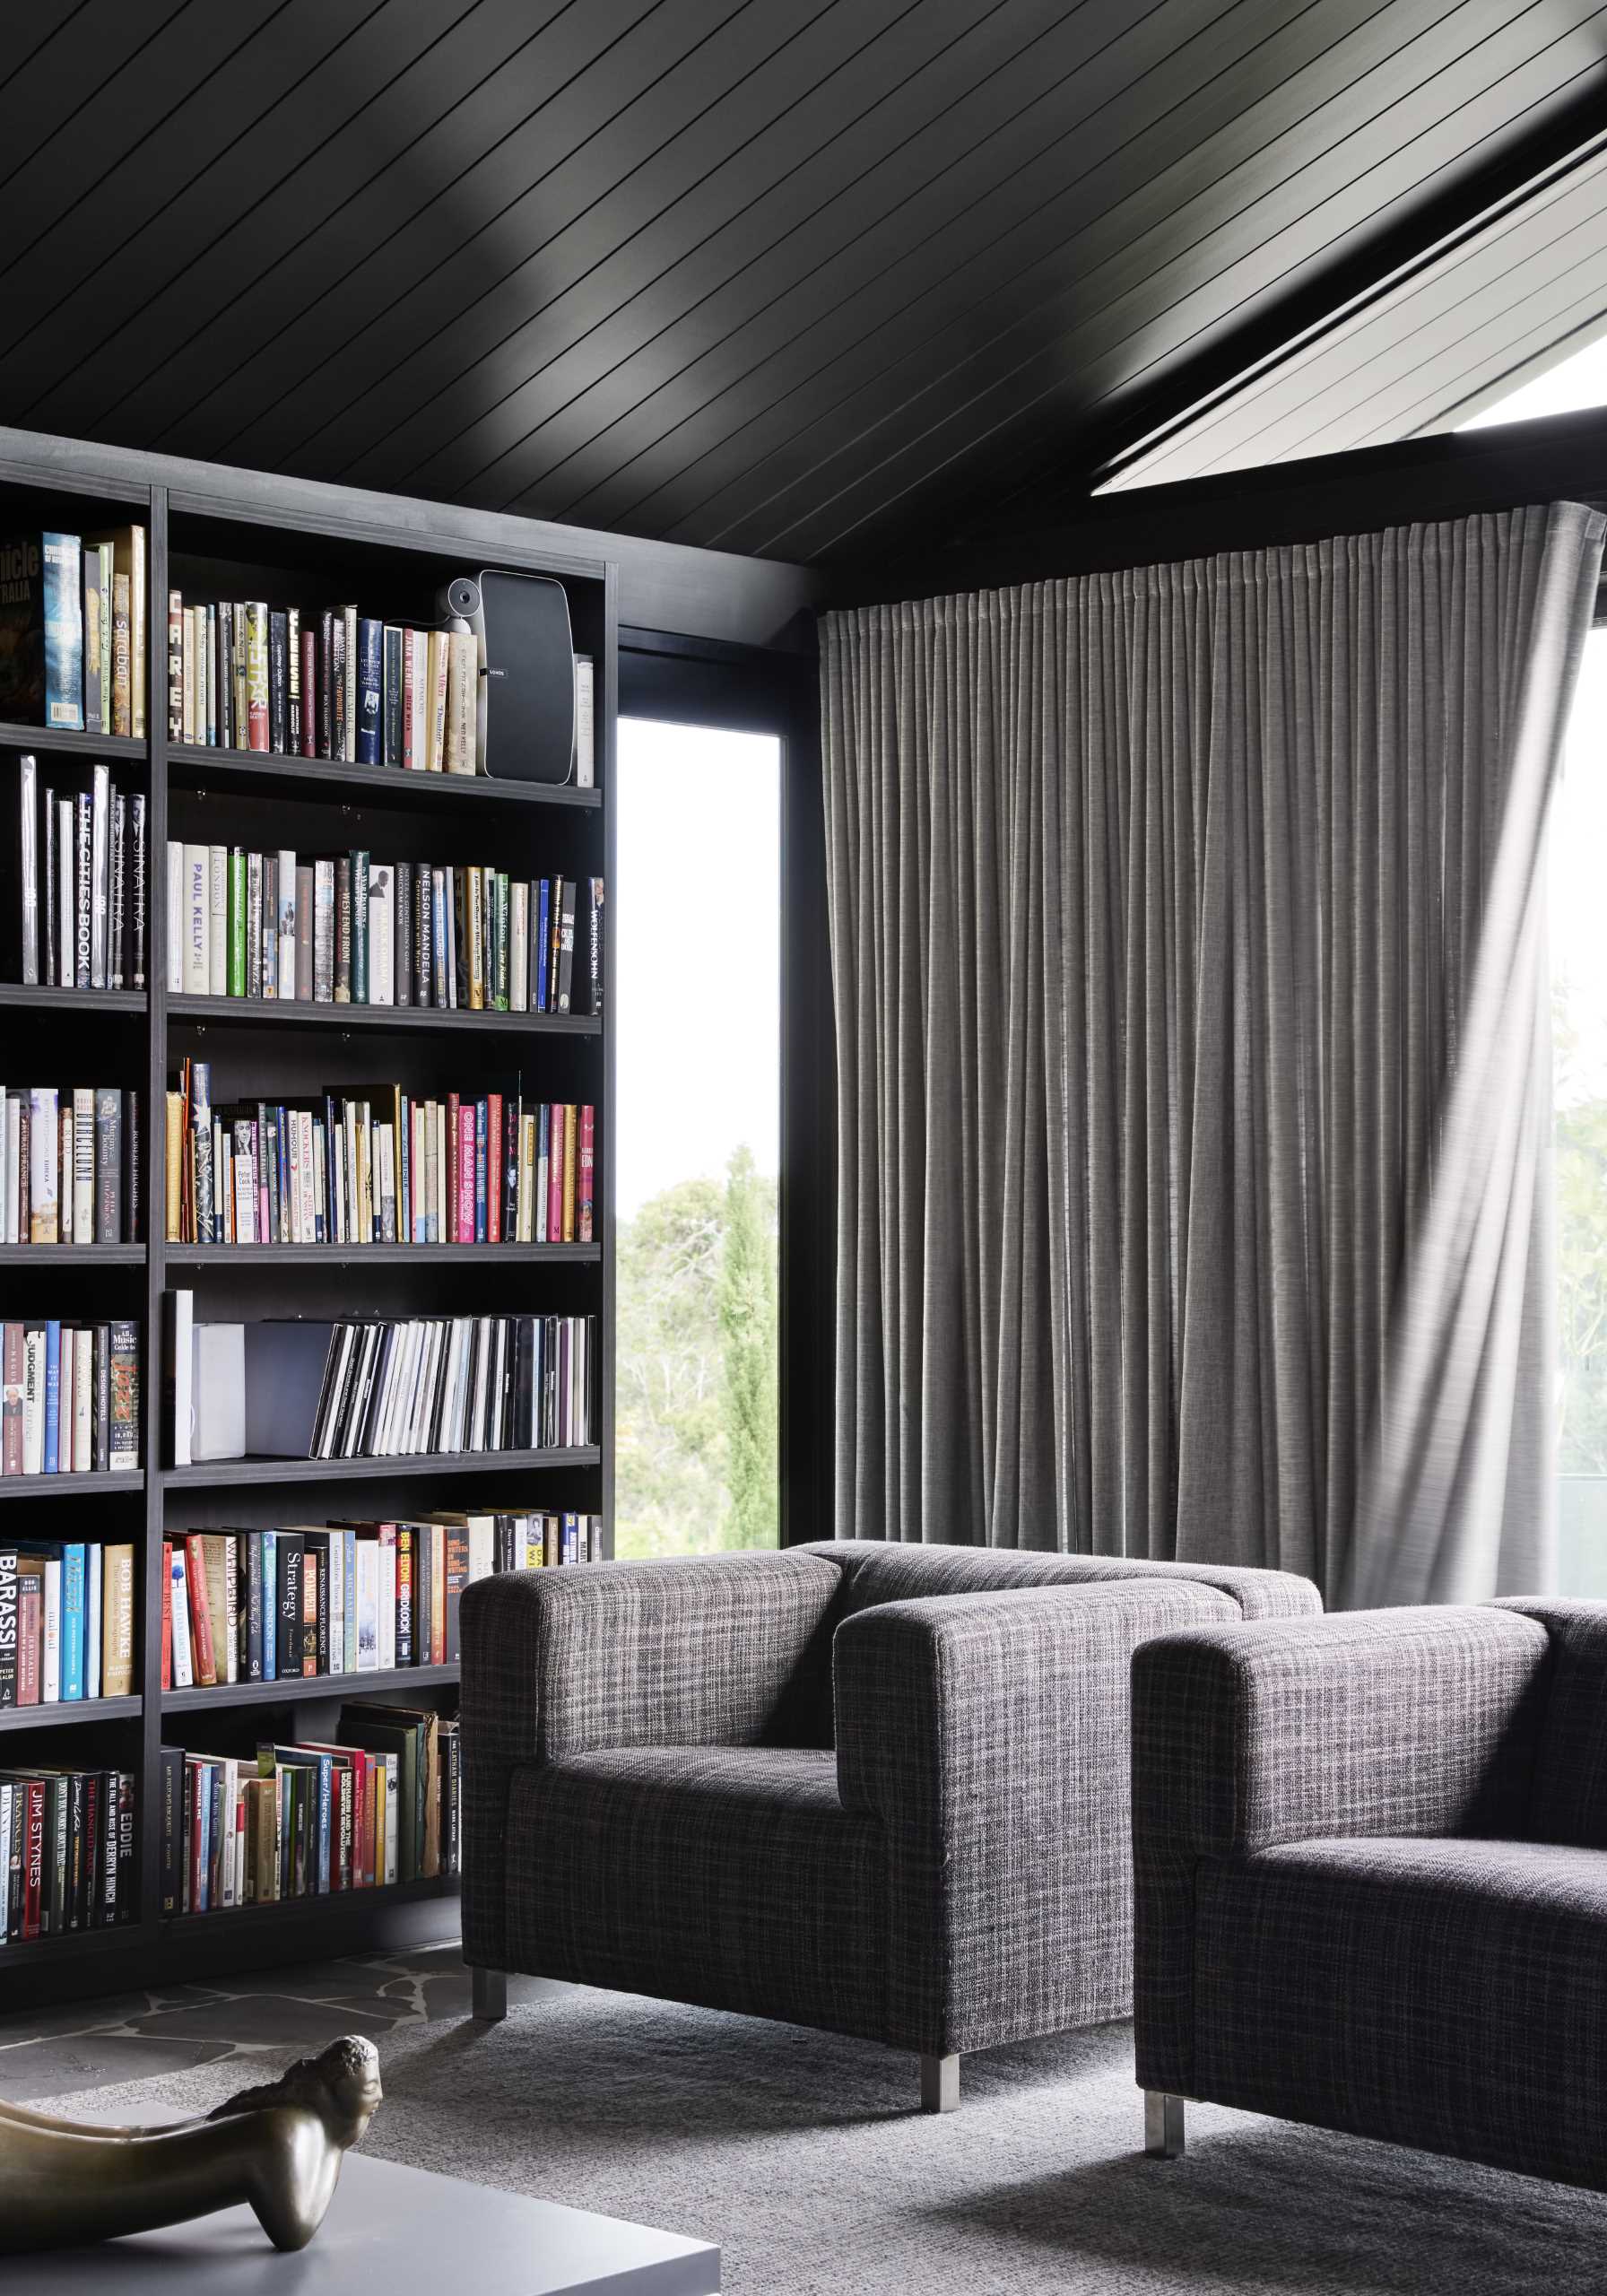 A modern living room with an abundance of bookshelves, and a dark and moody interior.